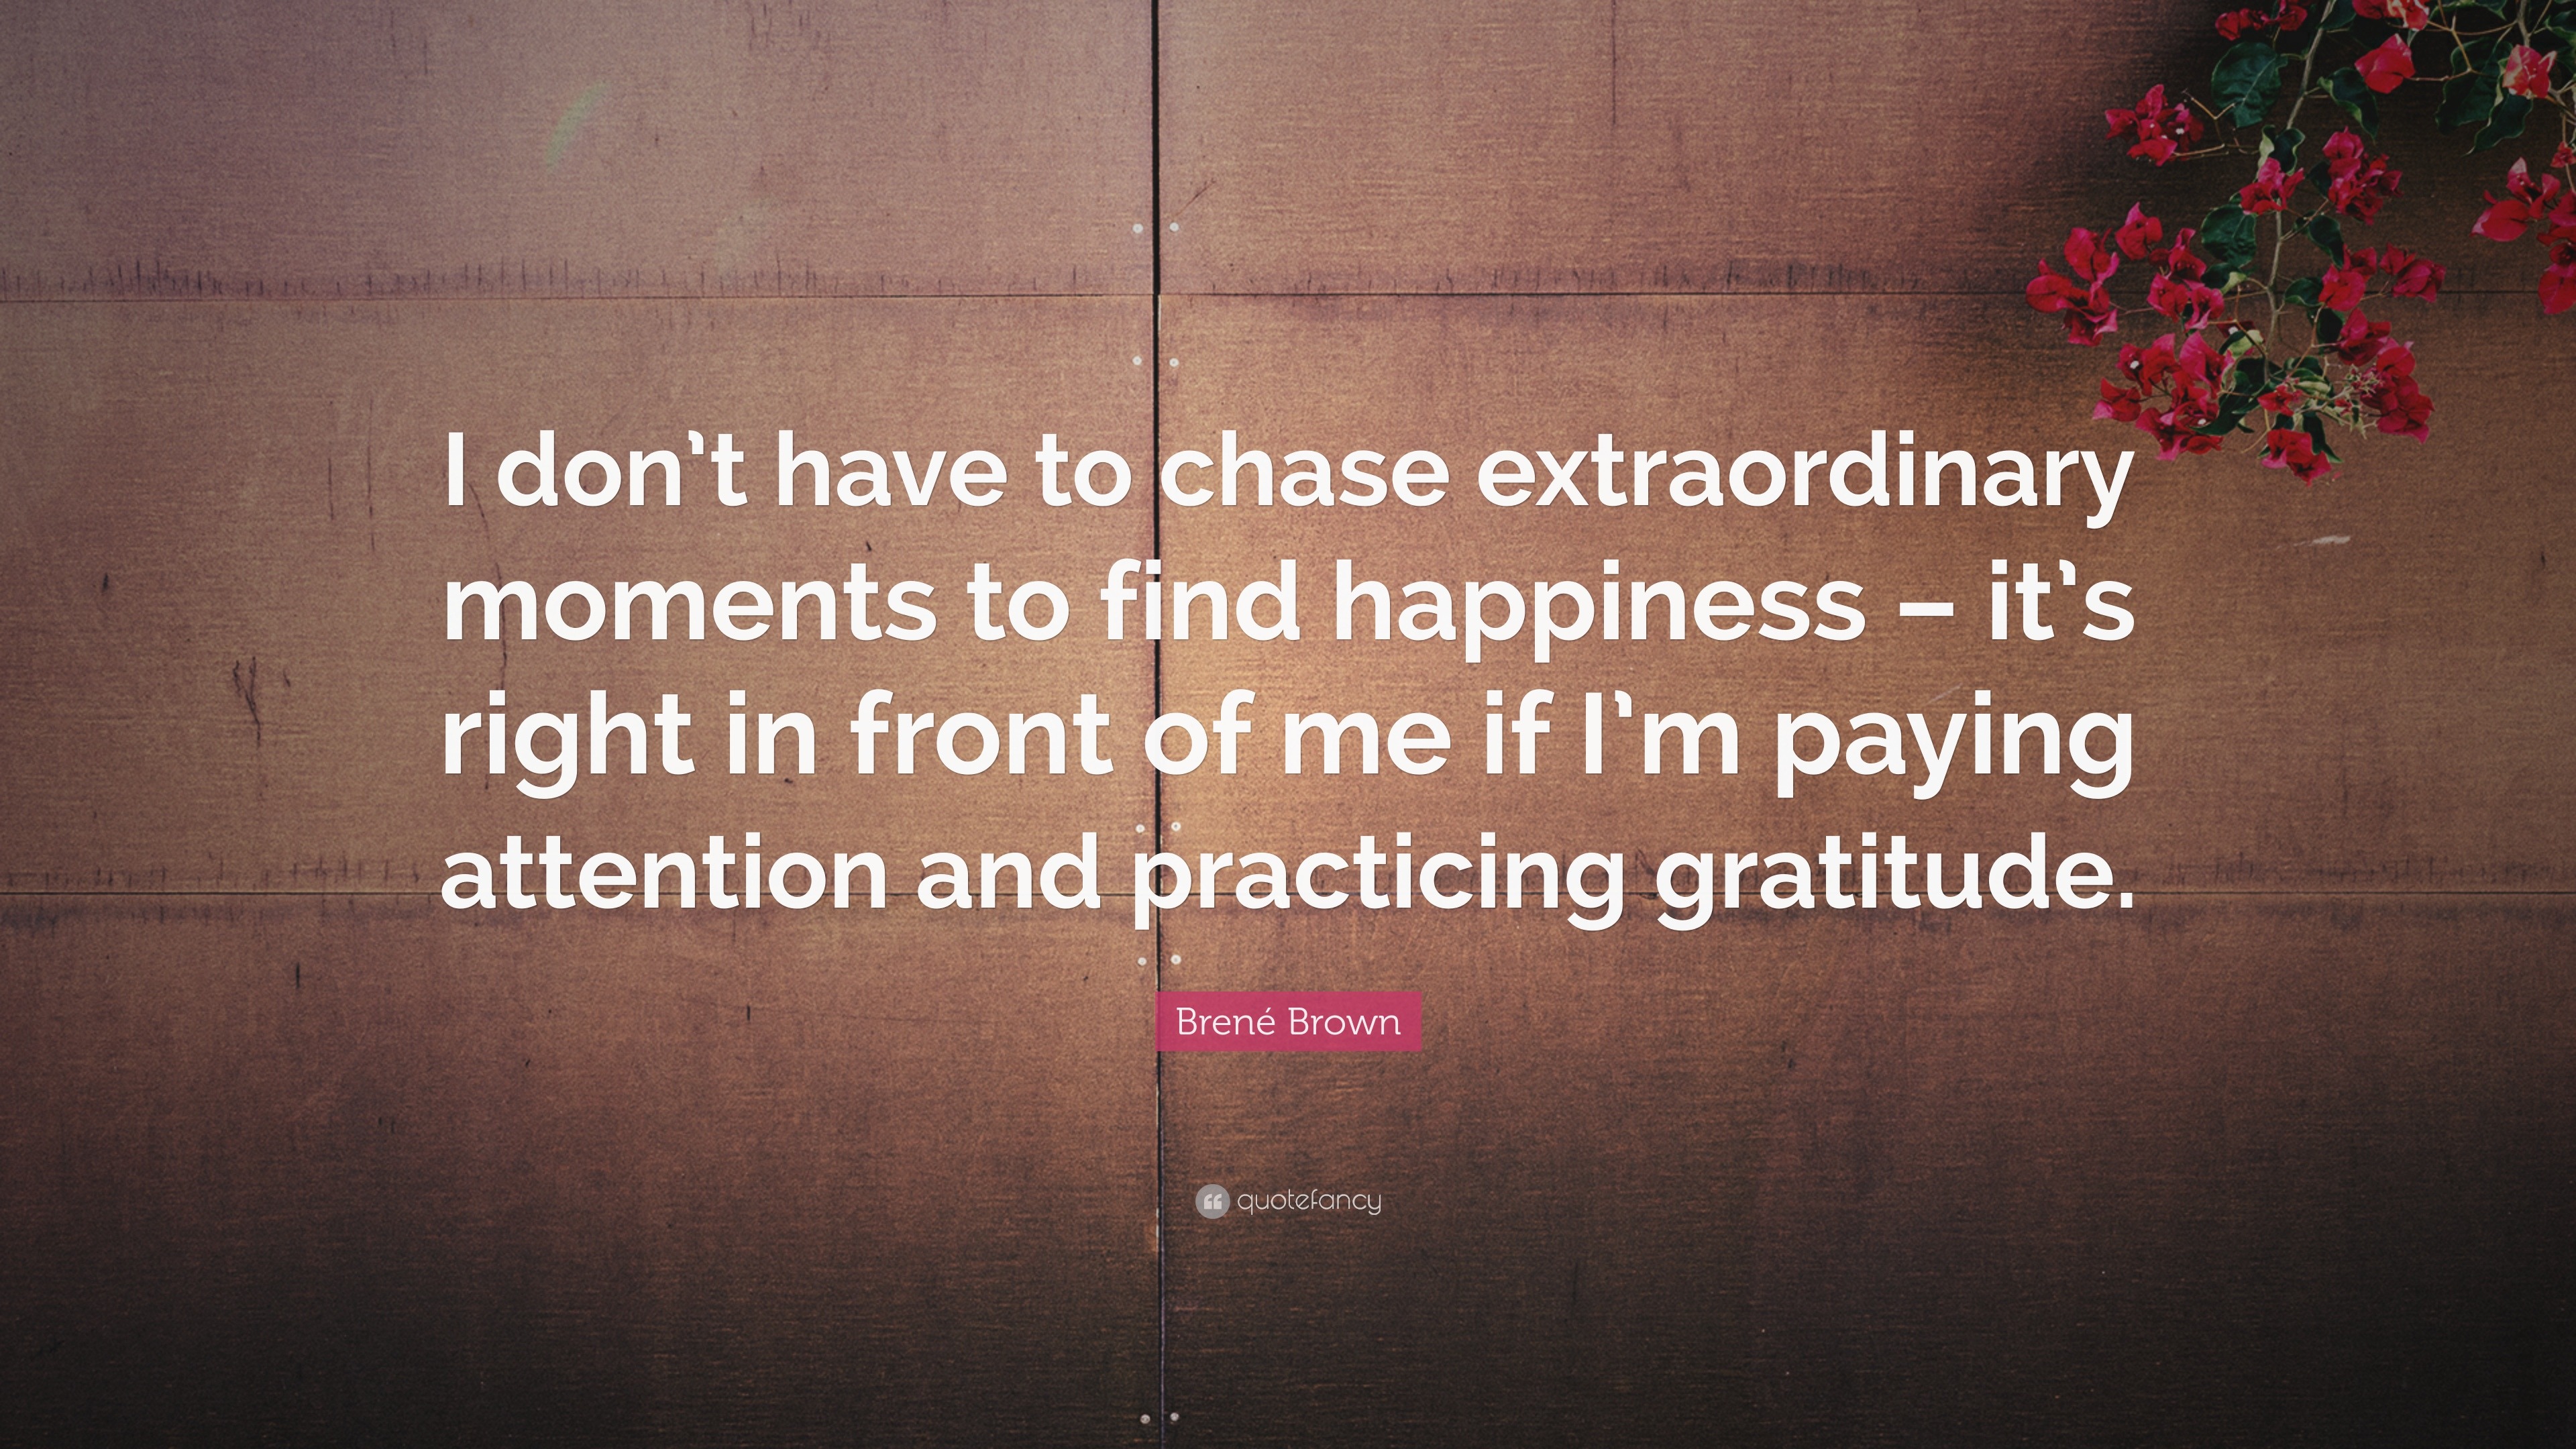 Brené Brown Quote “I don t have to chase extraordinary moments to find